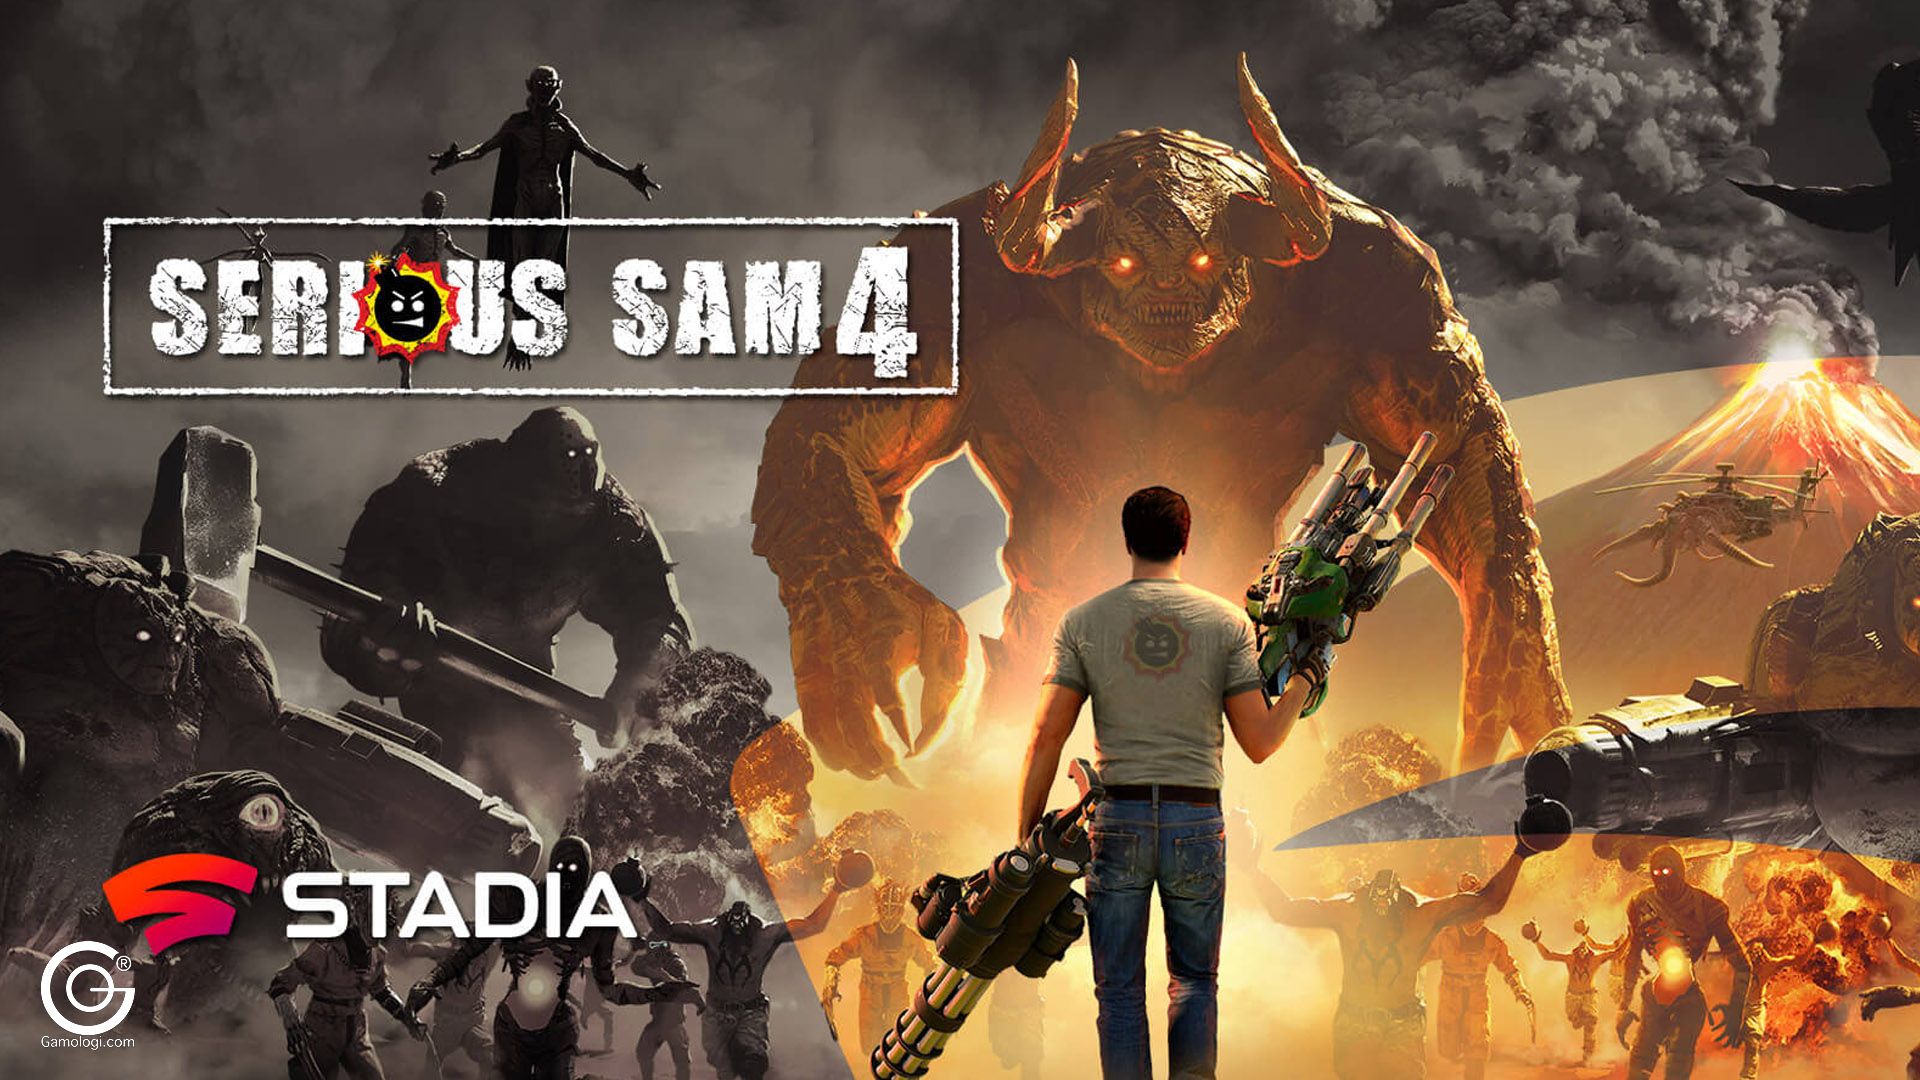 Serious Sam 4 gameplay trailer released and Retro Gaming News